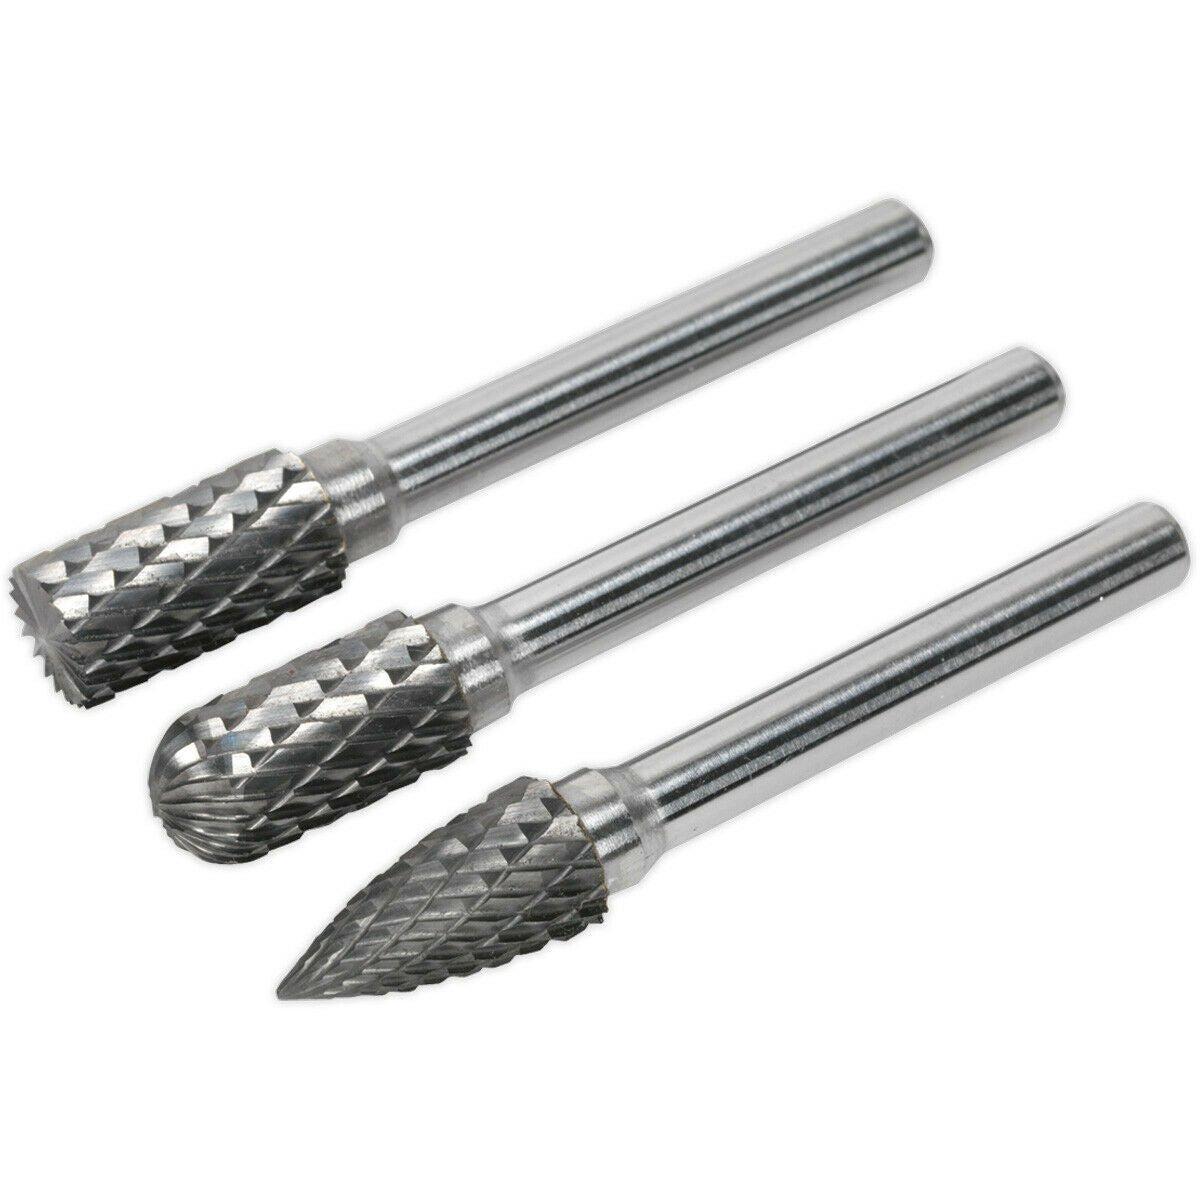 3 PACK - 10mm Tungsten Carbide Rotary Burr Bits Set - VARIOUS Cutting Heads